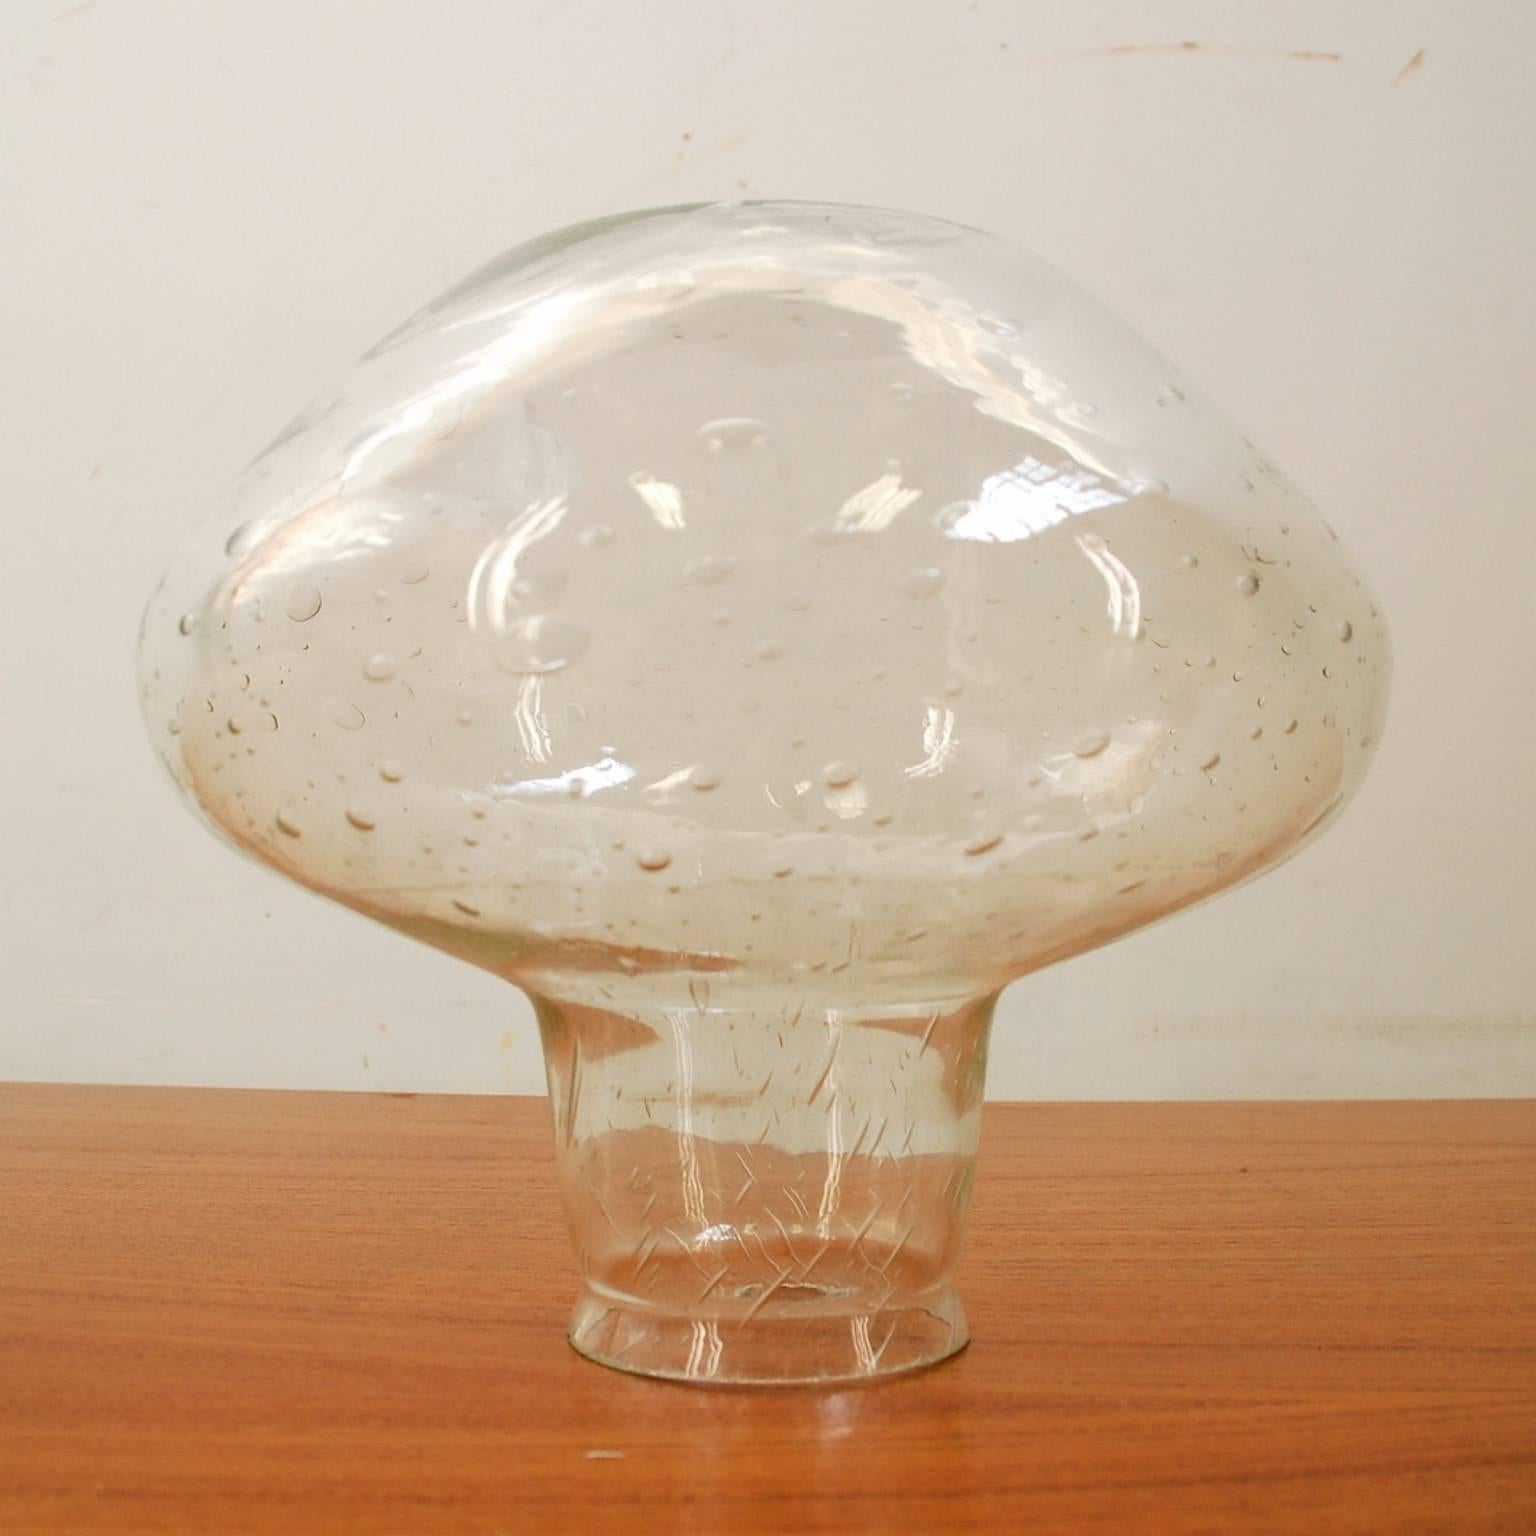 Wall lamp with beautiful glass sphere, black metal support and porcelain lamp socket. It was made by Louis Poulsen as type nr 38478 and remains in excellent condition; I don't think it has ever been used. This is not a very common lamp and